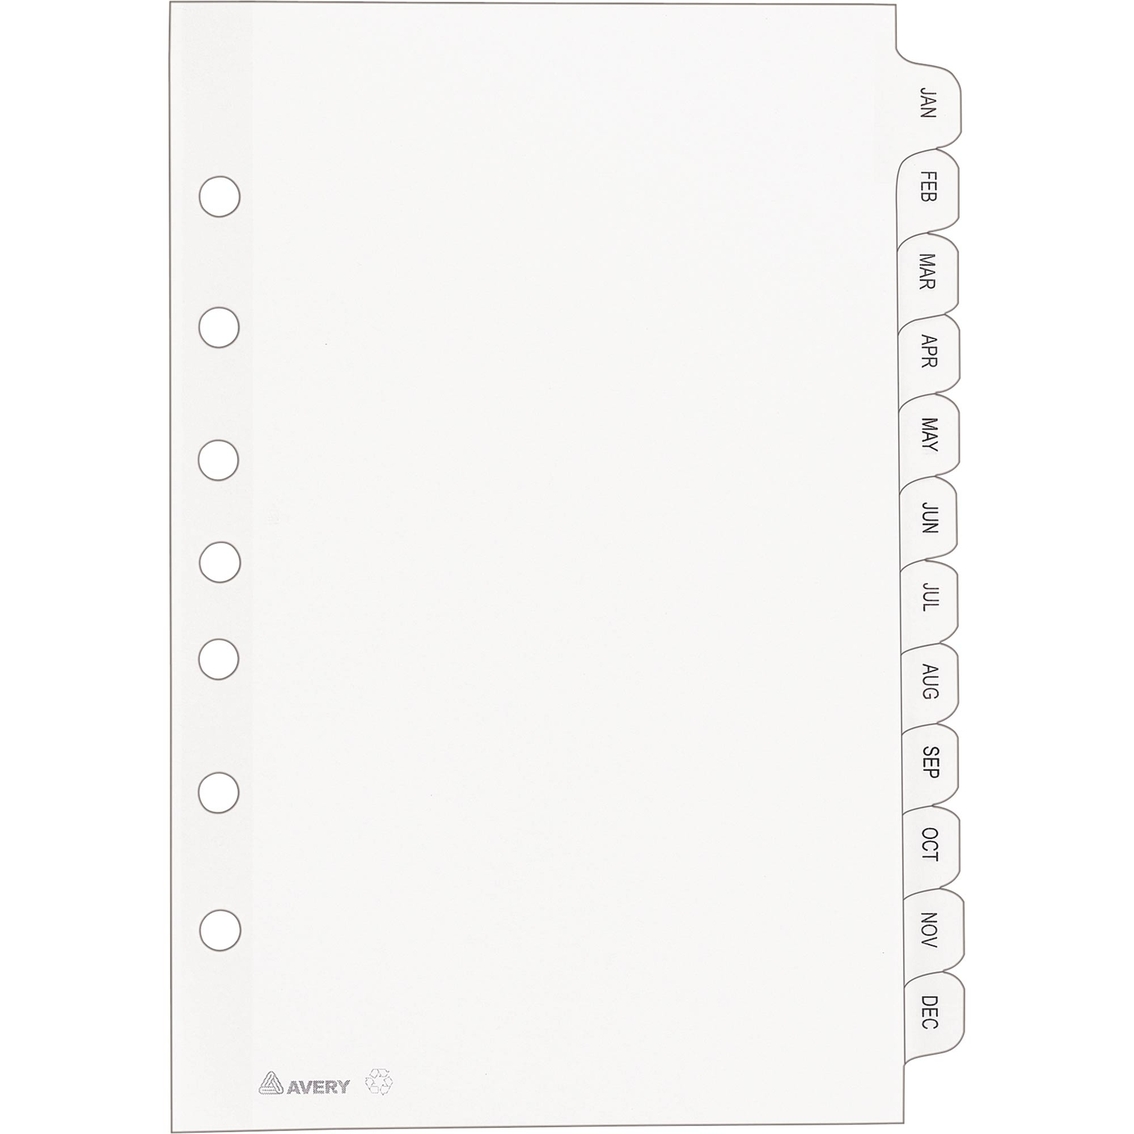 Avery Preprinted Tab 5.5 in. x 8.5 in Dividers, January to December - Image 2 of 3